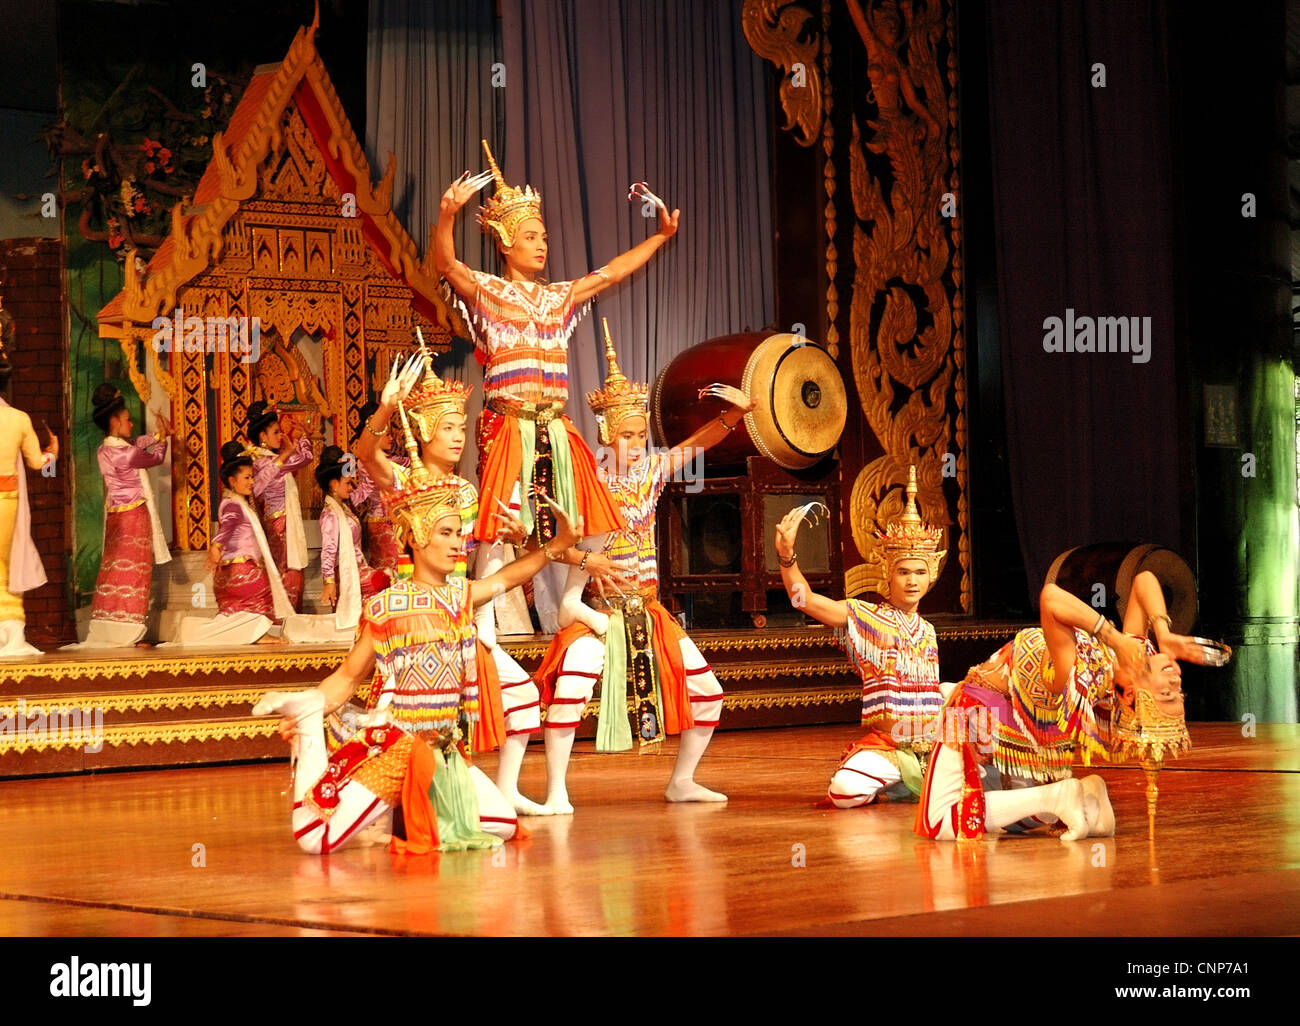 The famous Thai Culture and traditional dances show in Nong Nooch